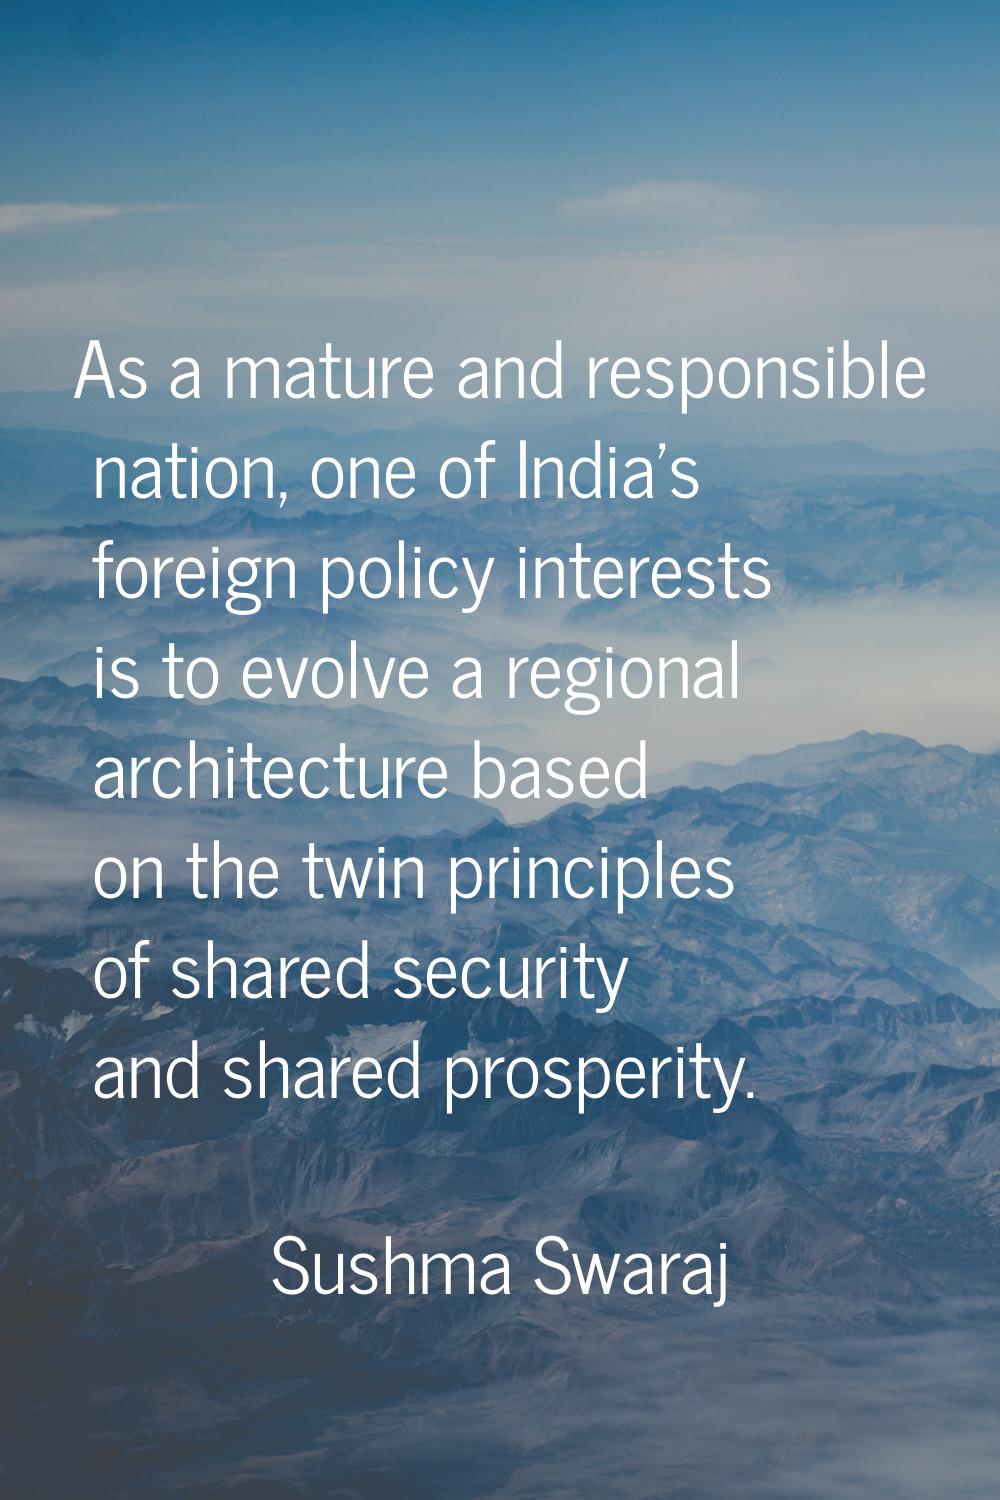 As a mature and responsible nation, one of India's foreign policy interests is to evolve a regional